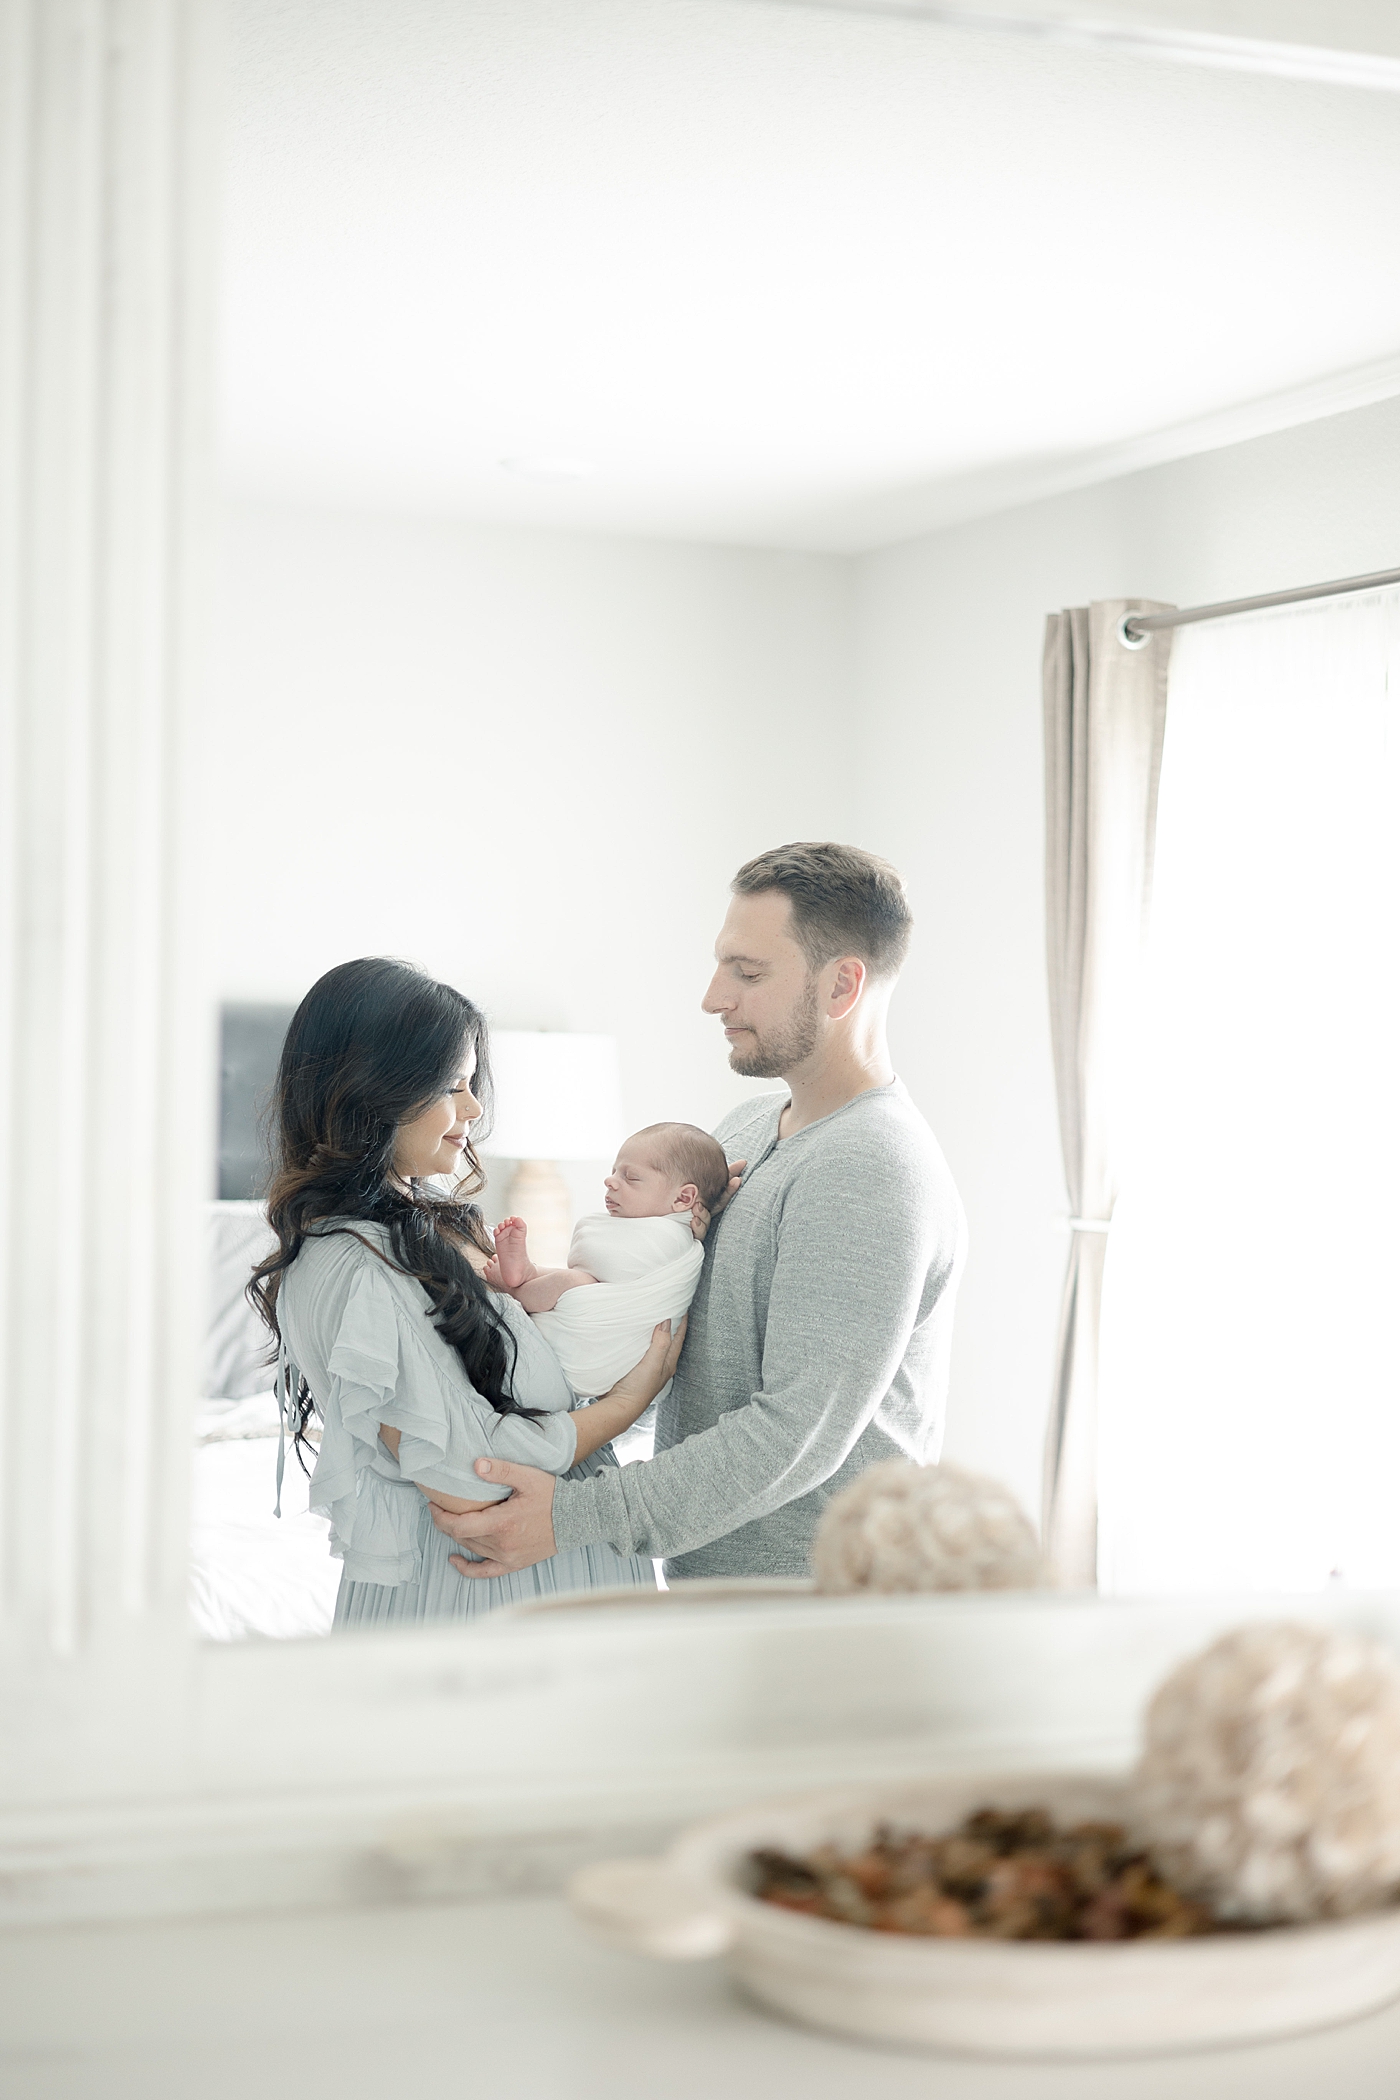 Mom and dad holding new baby in mirror reflection | Photo by Biloxi MS newborn photographer Little Sunshine Photography